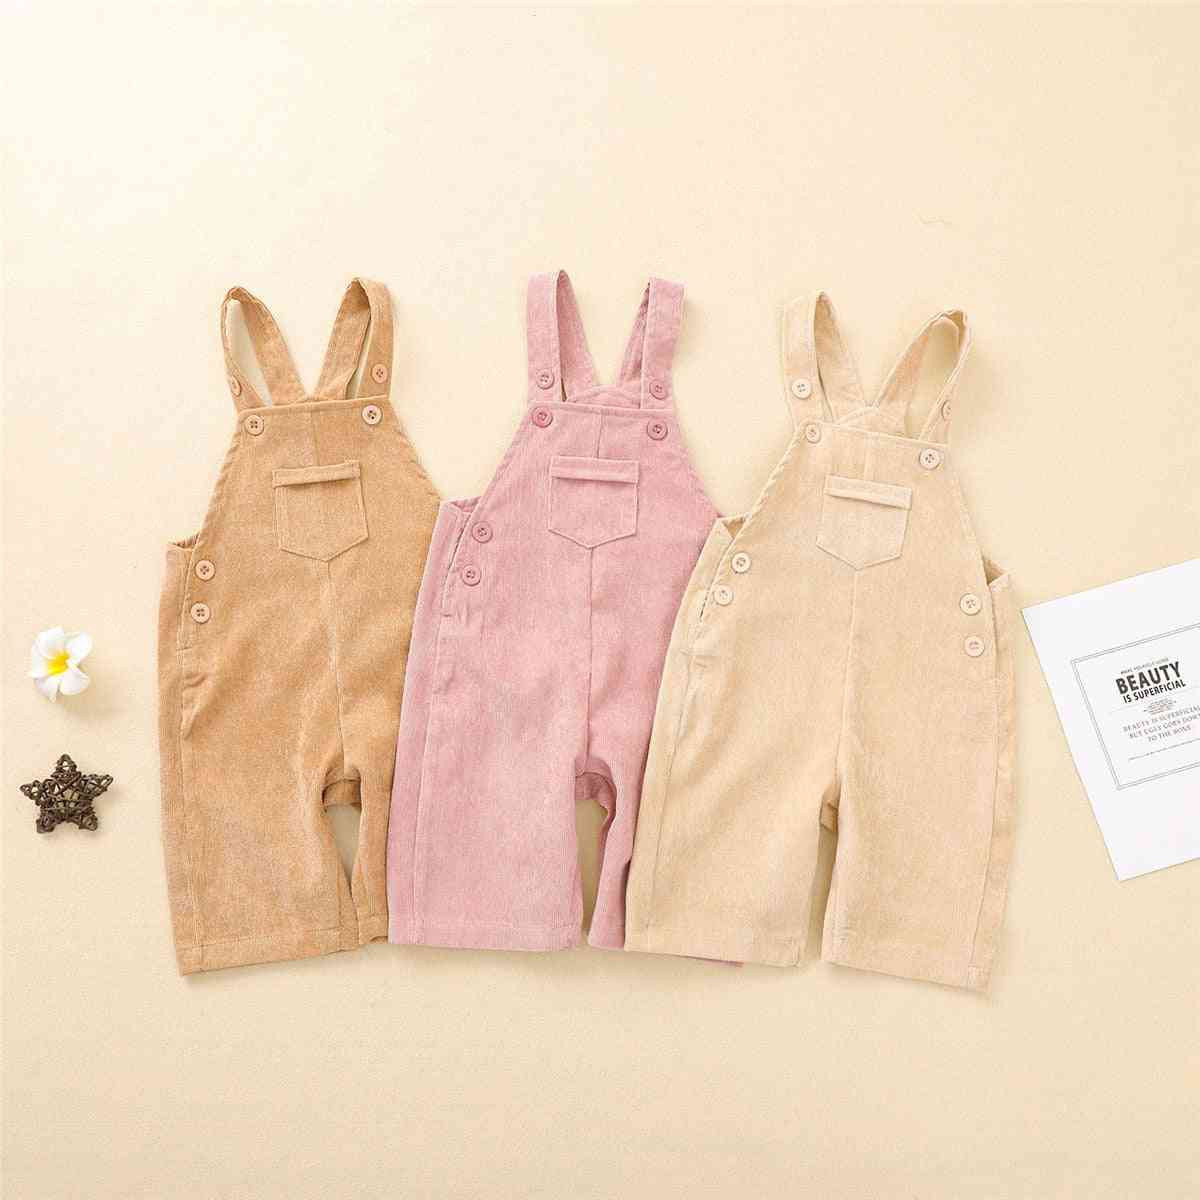 Baby Summer Clothing, Toddler Kids Overalls, Cute Bib Pants With Front Pocket